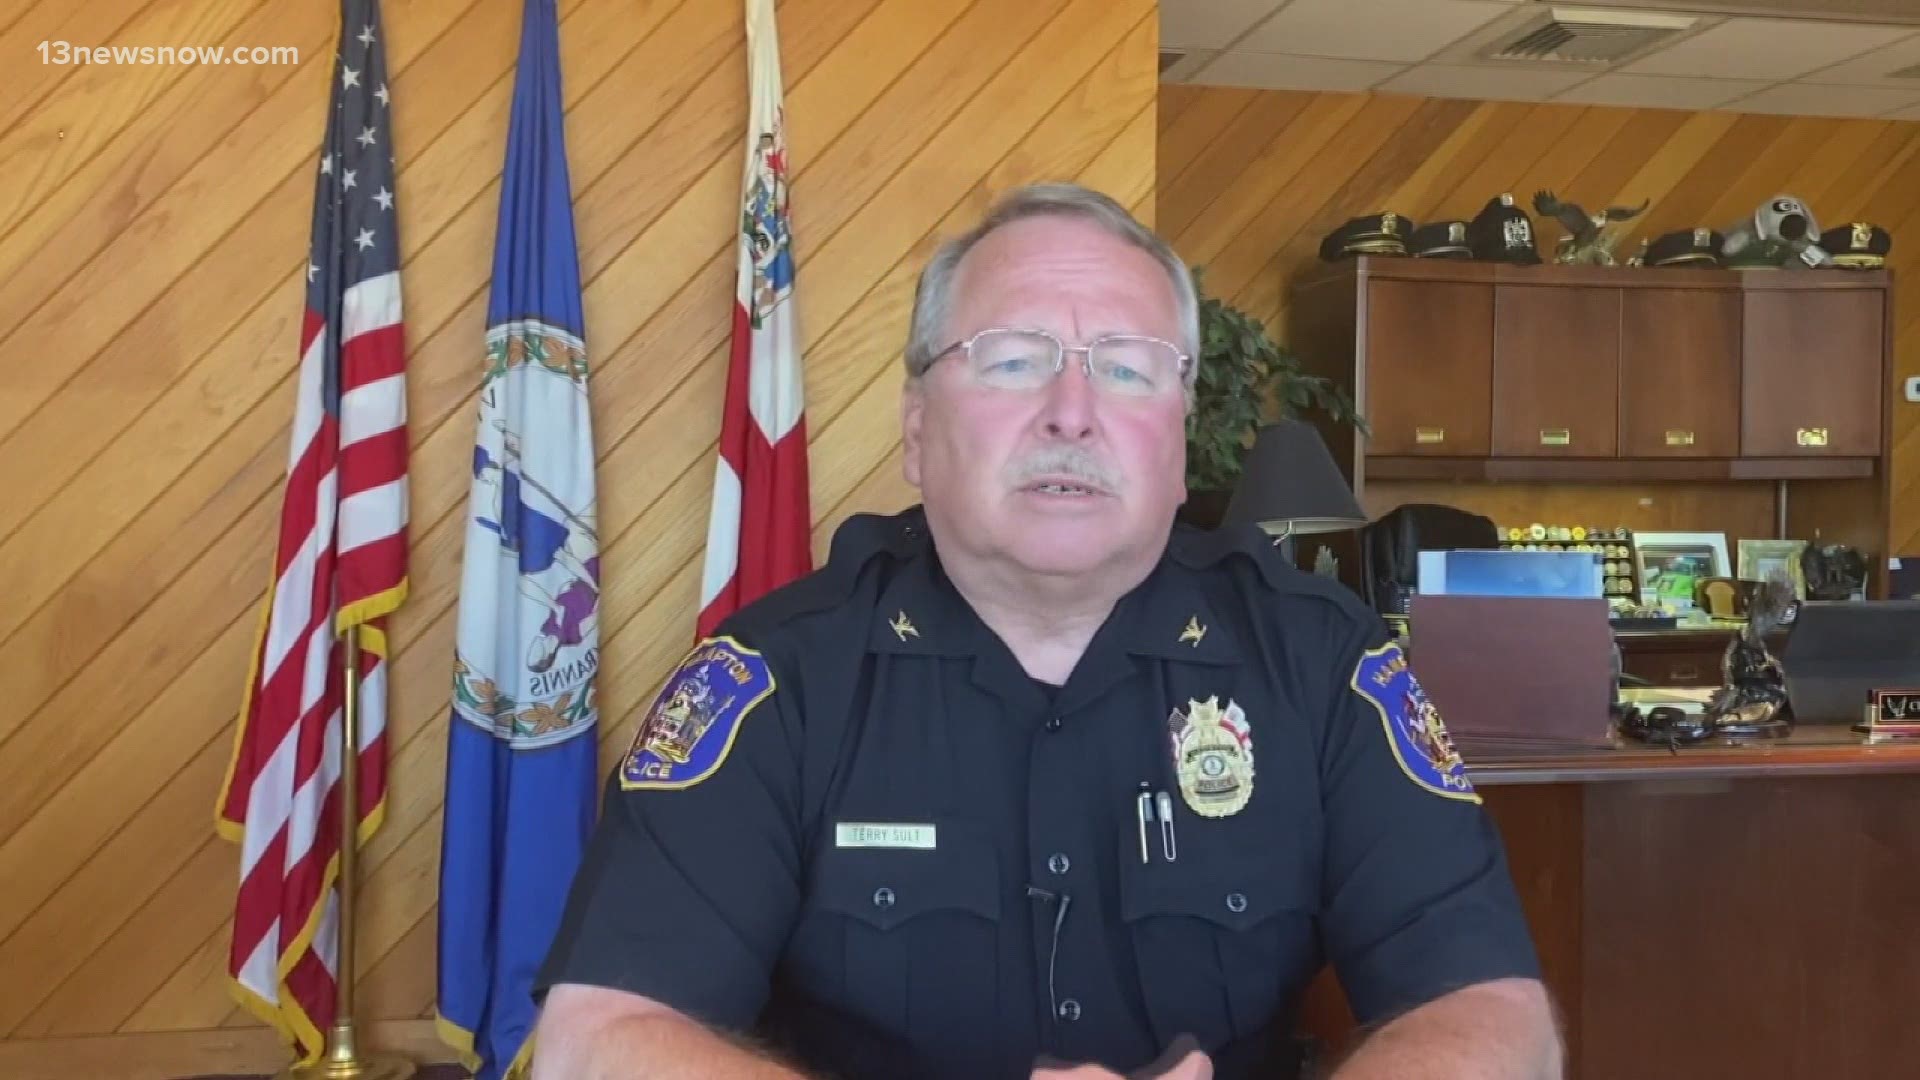 Terry Sult has served as Hampton's Police Chief since 2013.